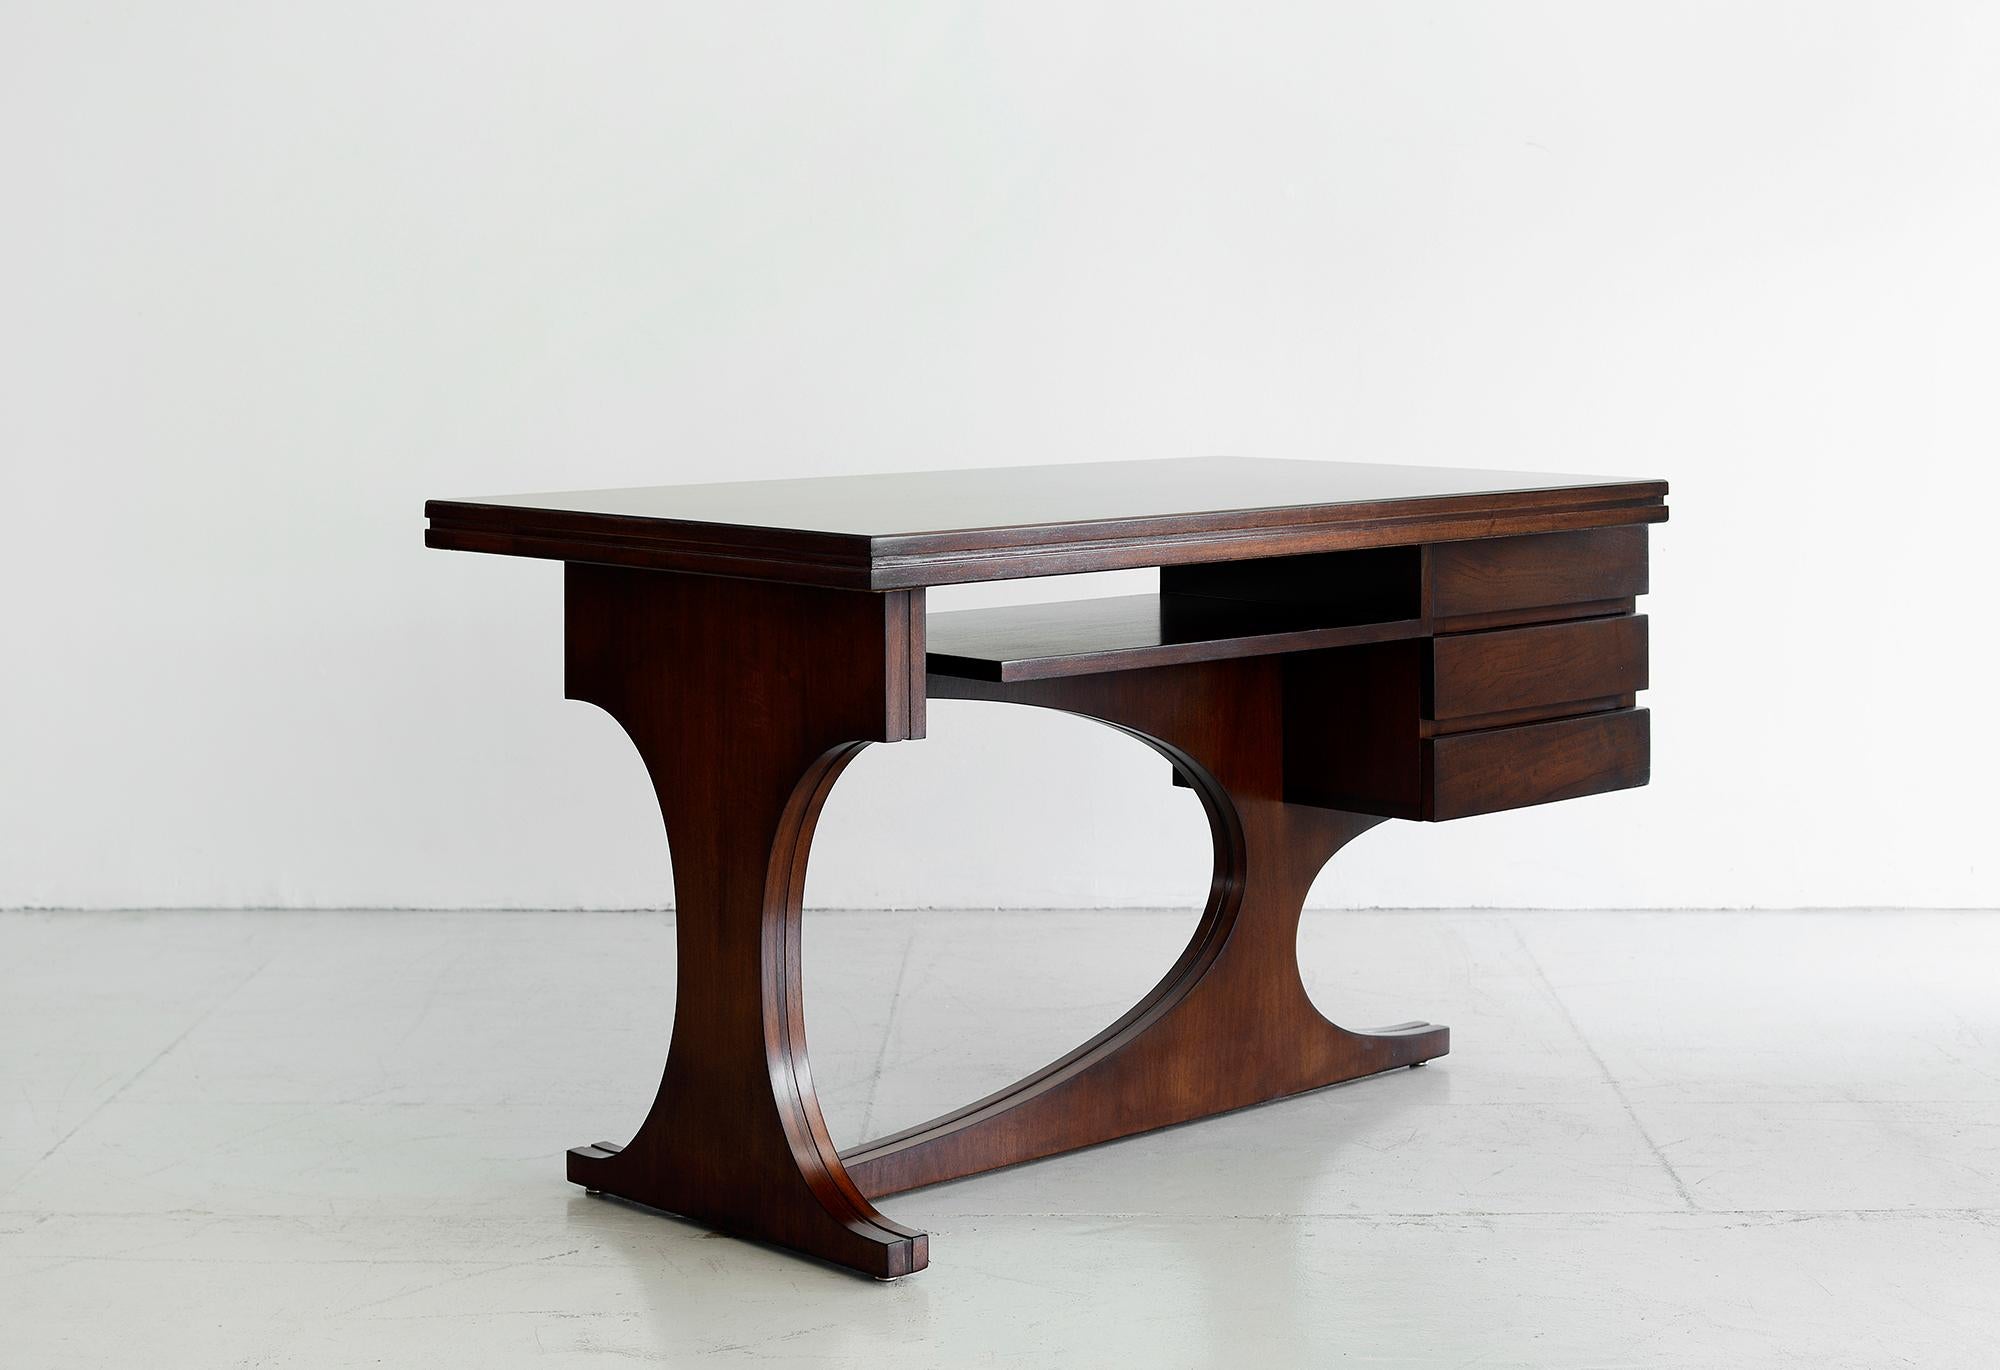 Unique Italian desk designed by Adriano Colombo, Pietro Galli, Vittorio Tavecchia
Single pedestal mahogany wood desk with 3 drawers on floating sculptural base,
circa 1960s and produced by Fratelli Asnaghi.

 